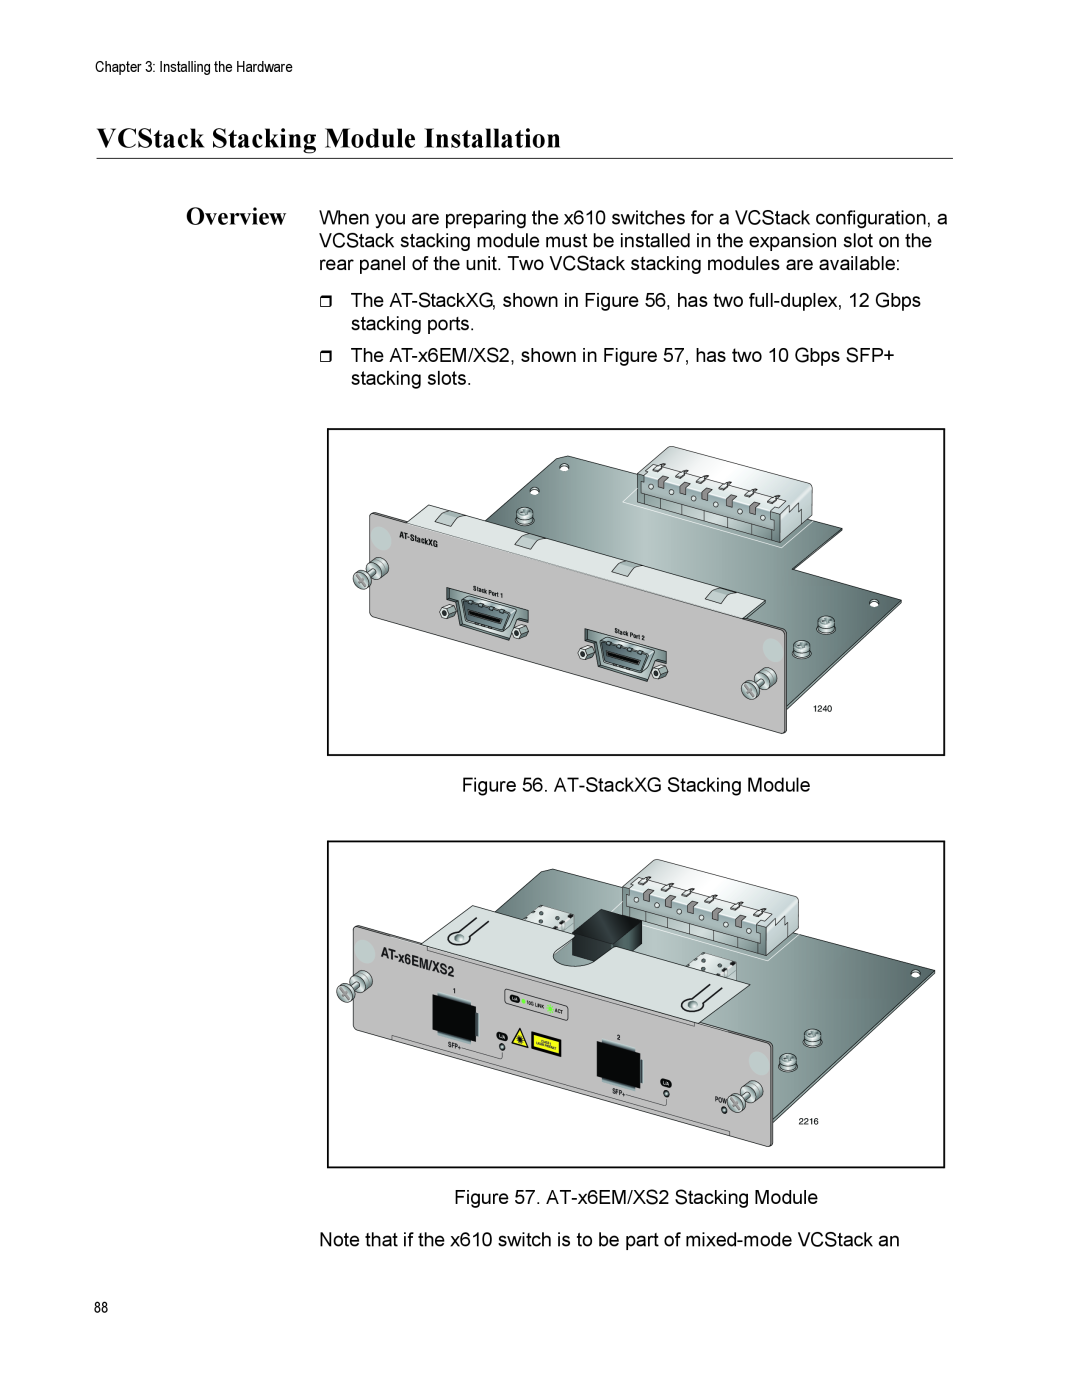 Allied Telesis X610-48TS-POE+, X610-48TS/X, X610-24TS-POE+, X610-24SPS/X, X610-24TS/X VCStack Stacking Module Installation 